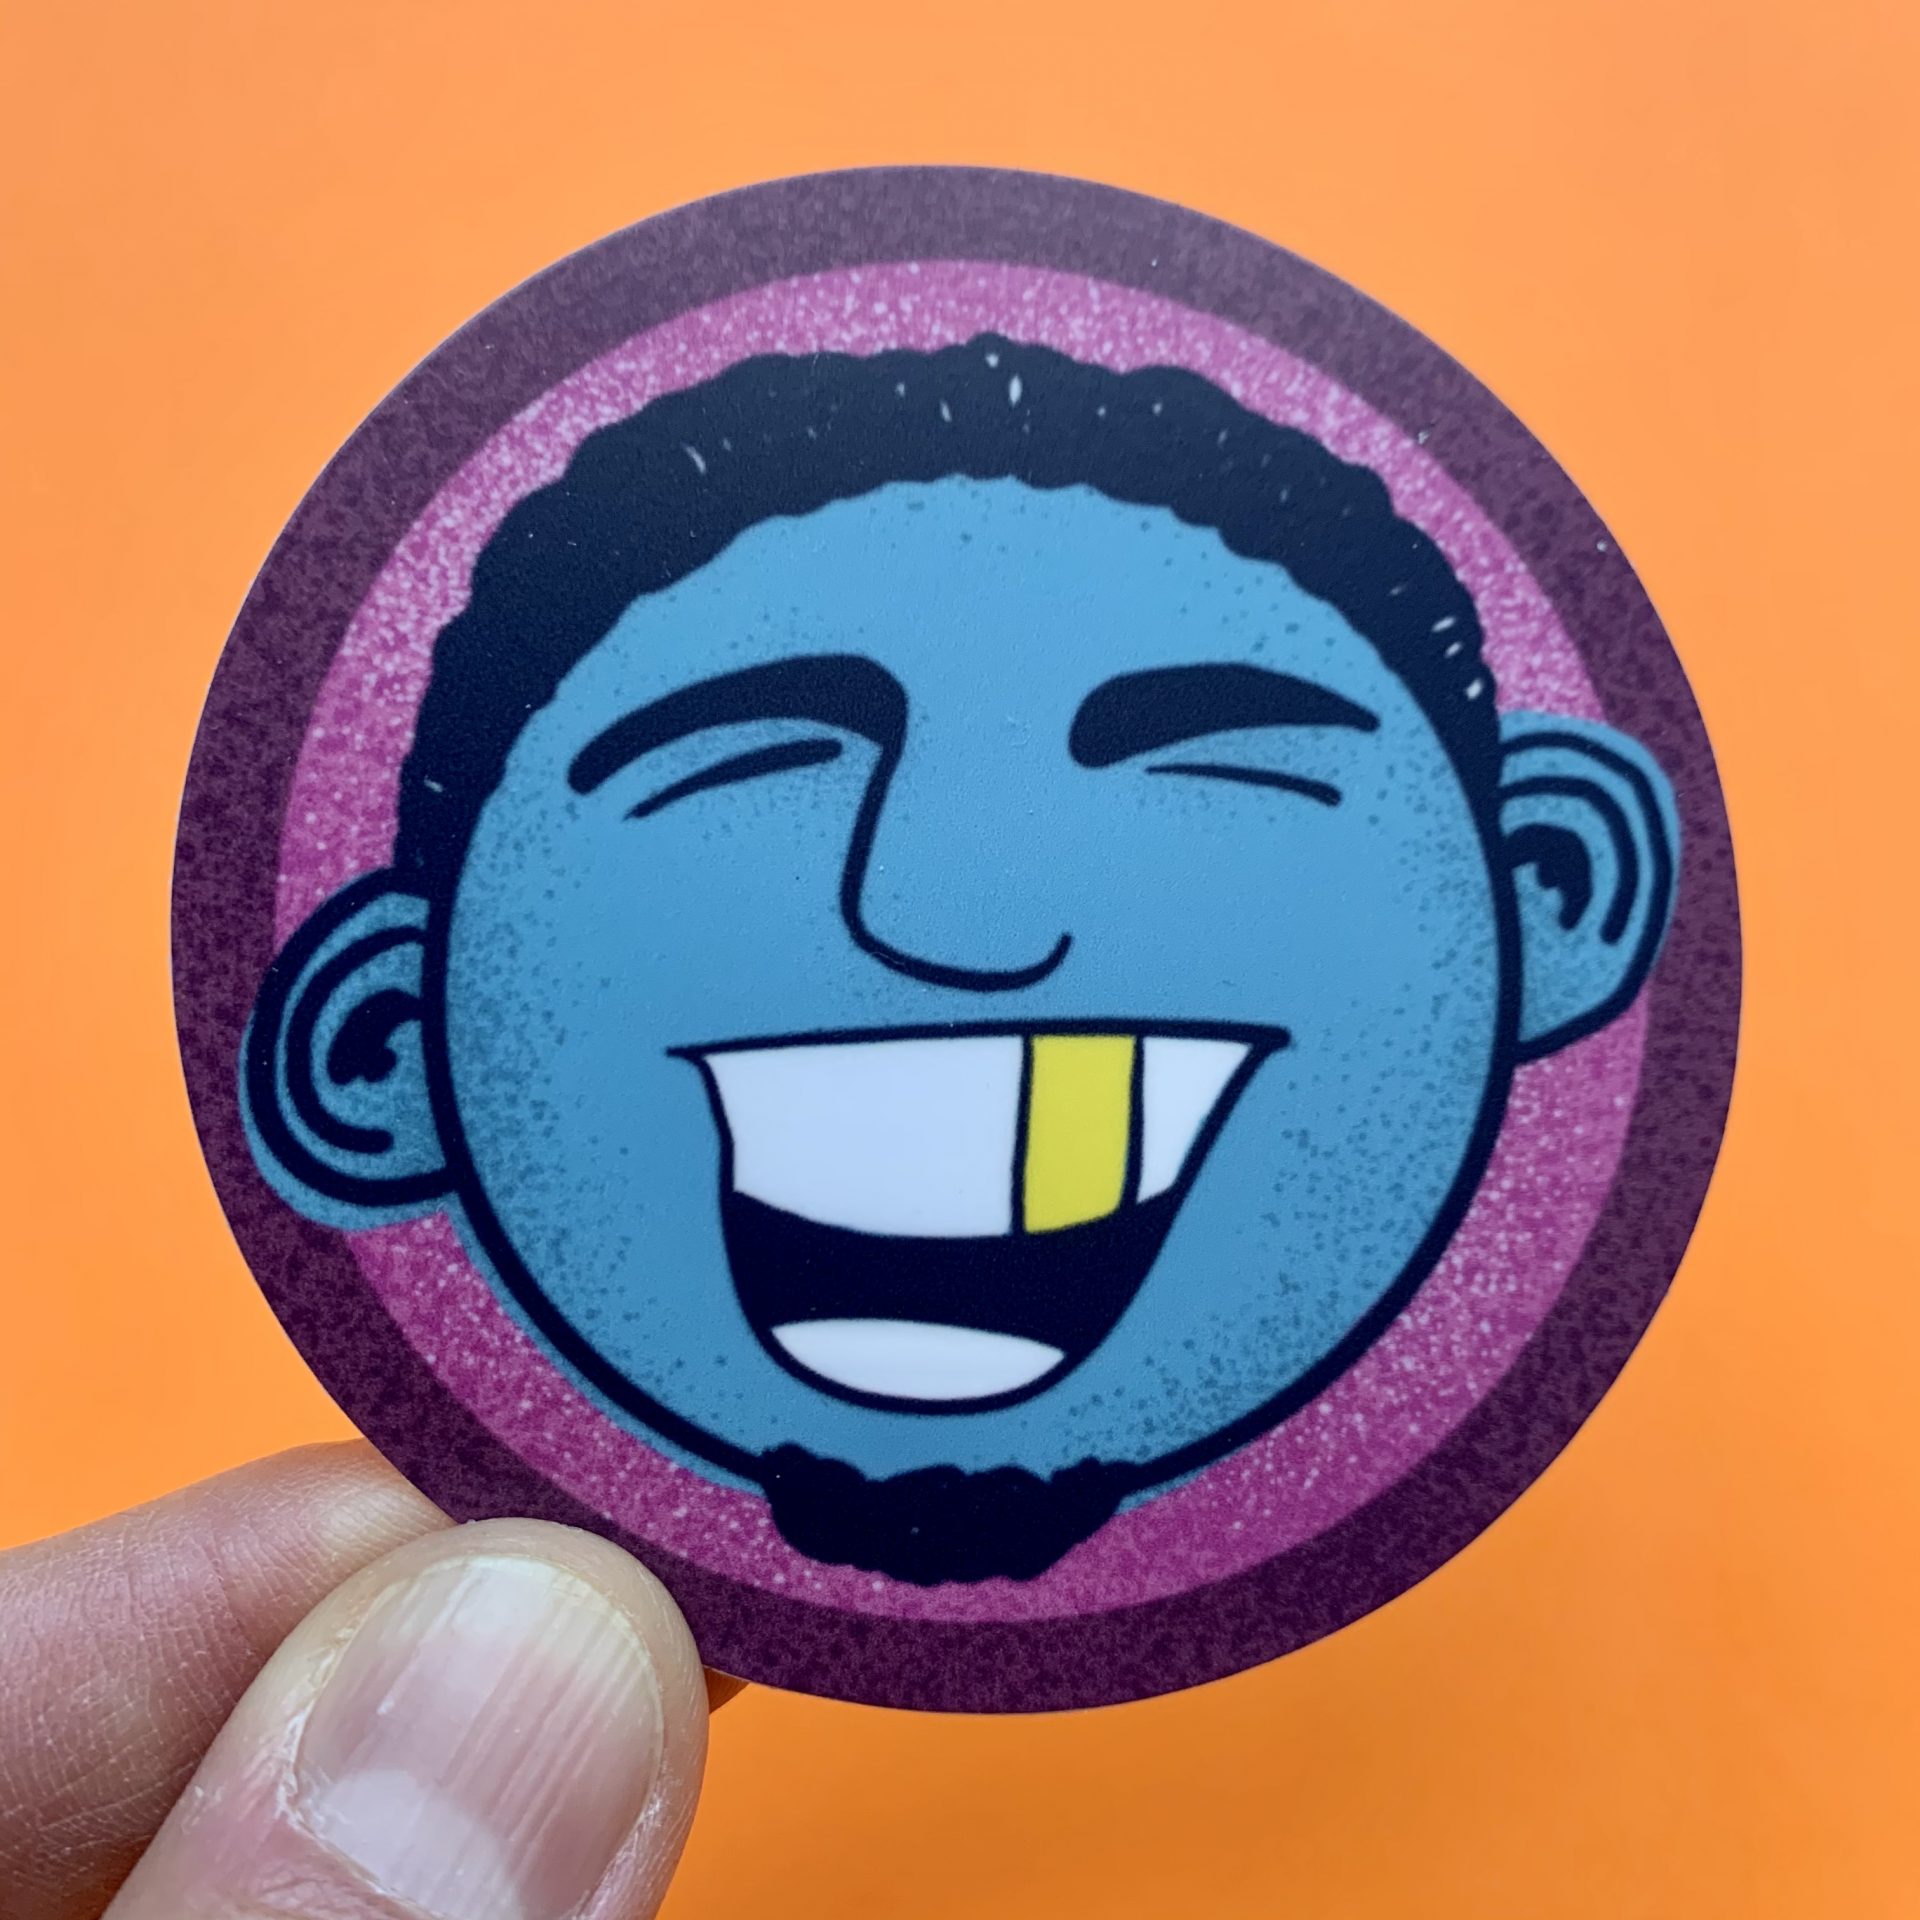 Gold Tooth Dude Sticker – Cool Groovy Funk